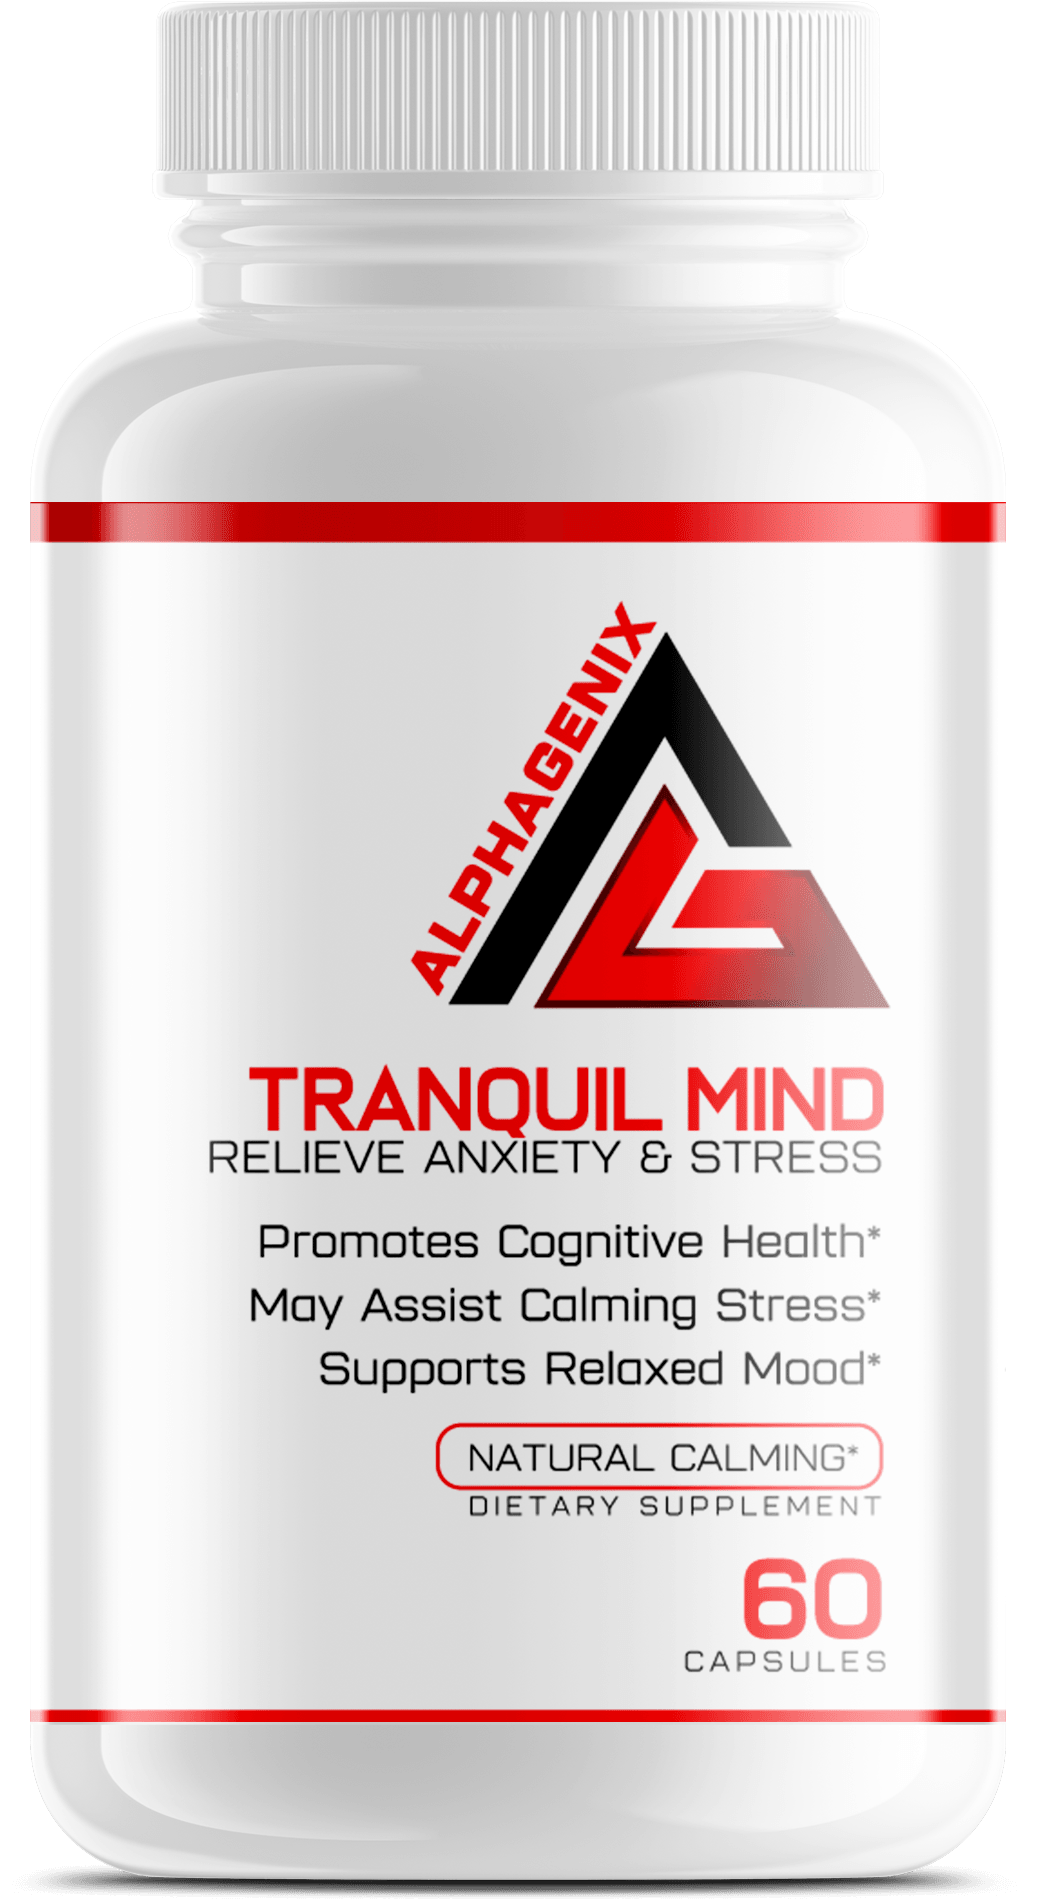 TranquilMind - Supports Cognitive Health & A Calm, Relaxed Mood - AlphaGenix